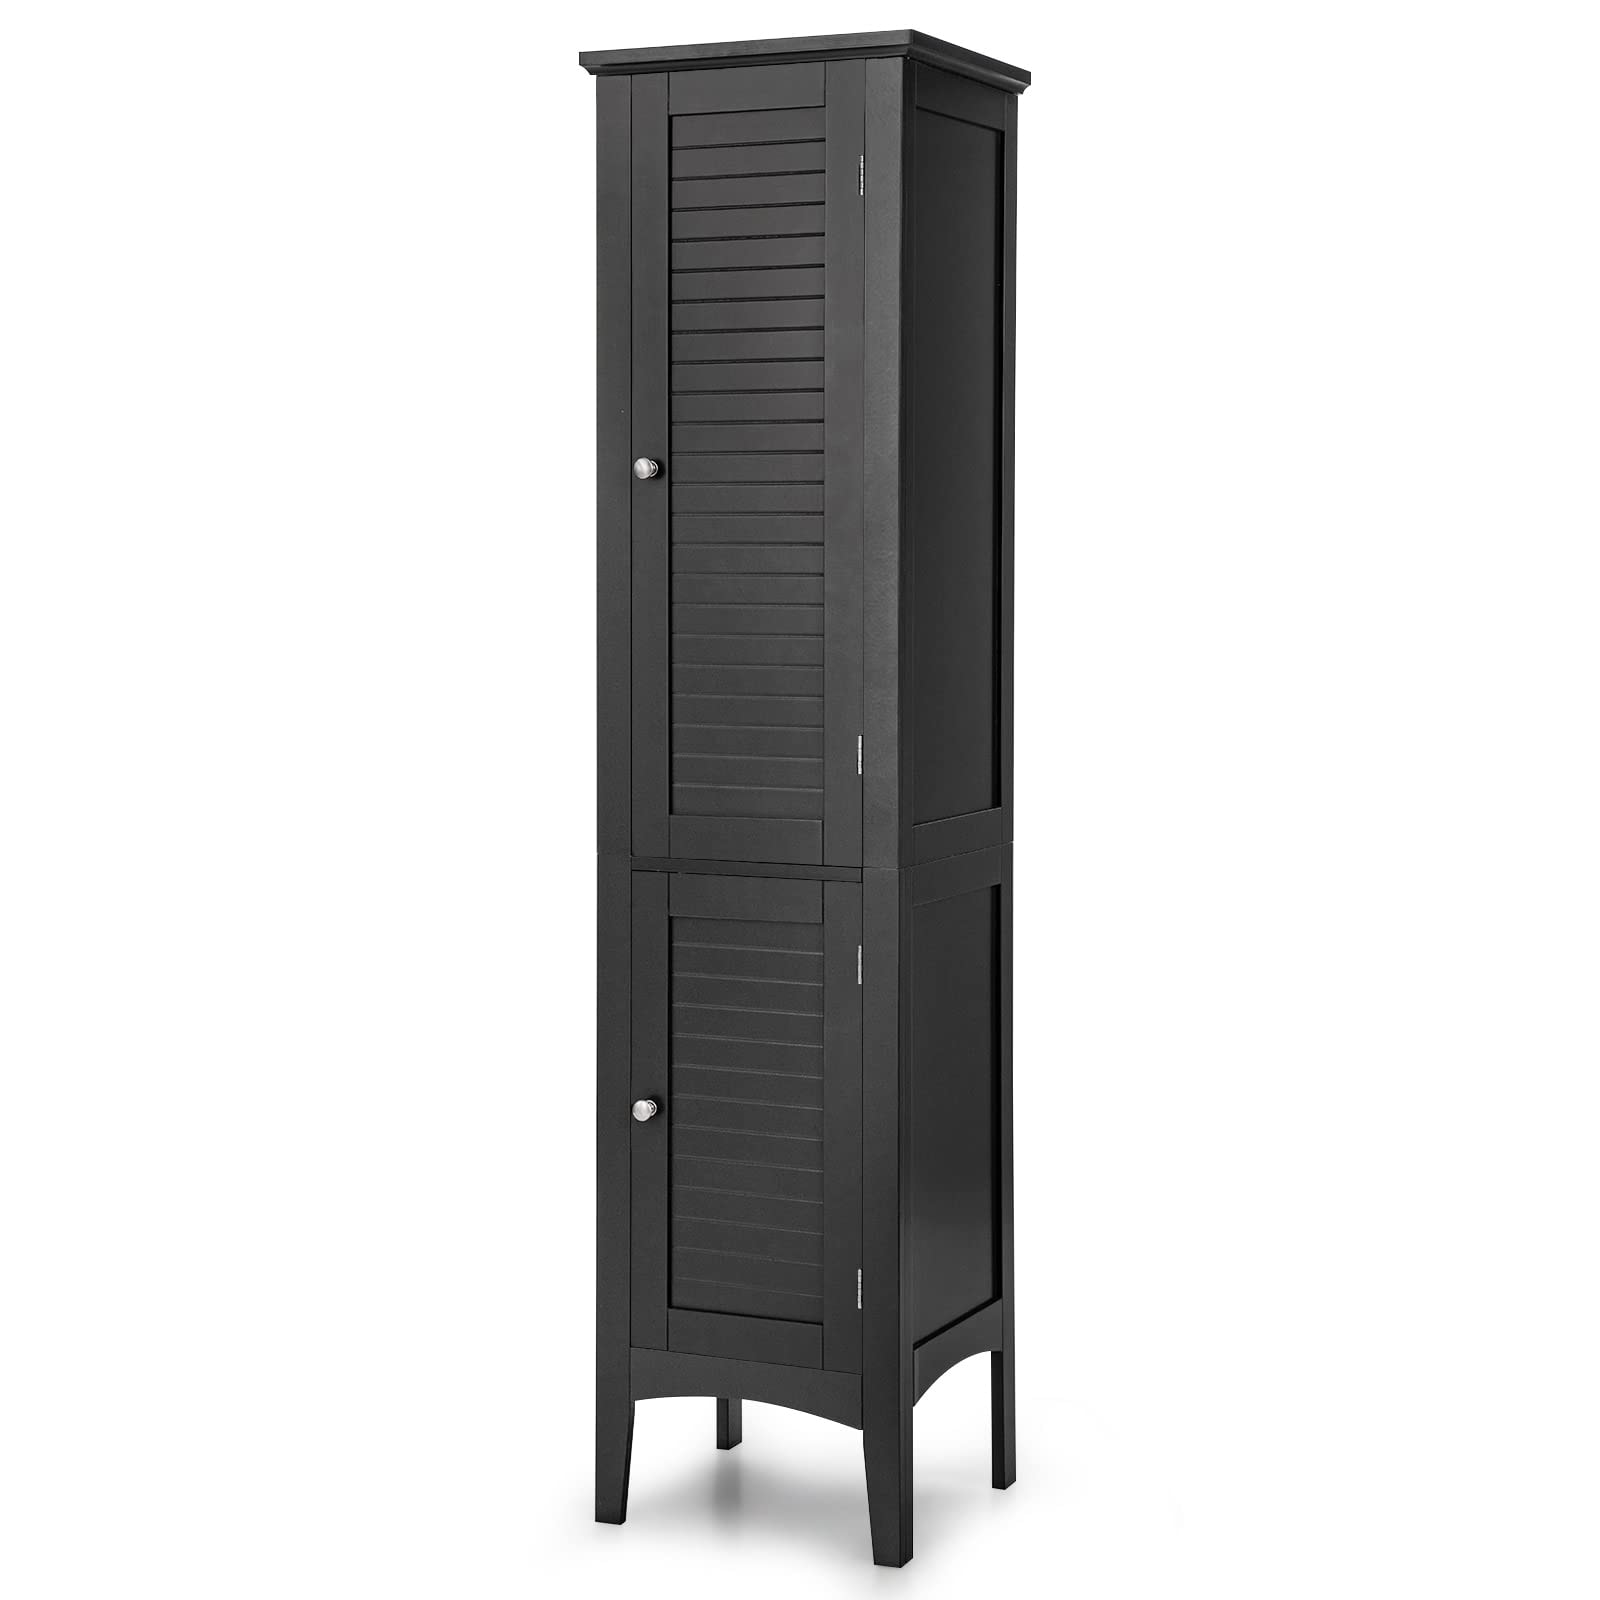 https://ak1.ostkcdn.com/images/products/is/images/direct/77f0379867b4c544495548847cabf89e90cebbce/Bathroom-Storage-Cabinet-with-Shelves%2C-Freestanding-Slim-Cabinet%2C-Tall-Organizer%2C-Bedroom-Linen-Tower-Narrow-Floor-Cabinet.jpg